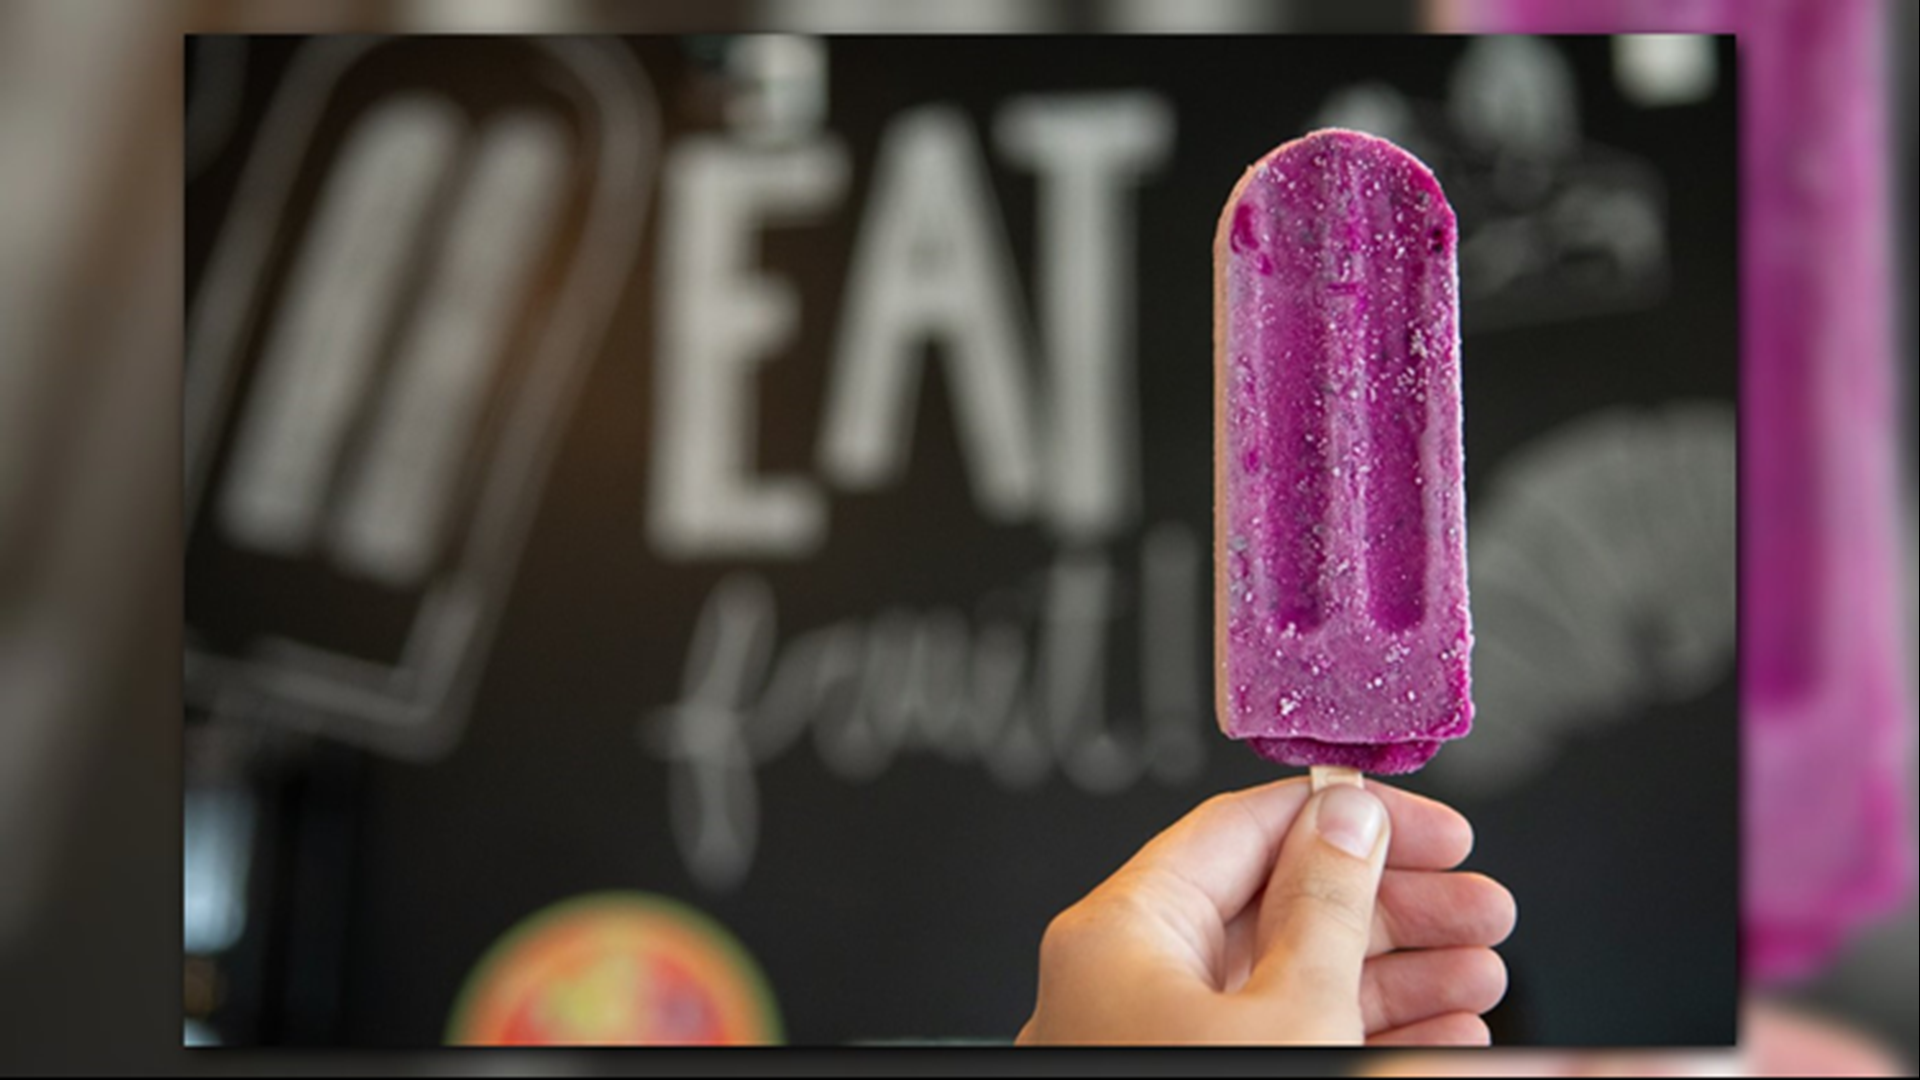 The Hyppo Gourmet Ice Pops, better known as the Hyppo, is known for its fun, flavorful and eccentric flavor popsicles. Melissa Guz is trying the strawberry datil pop, made from the datil peppers of St. Augustine.